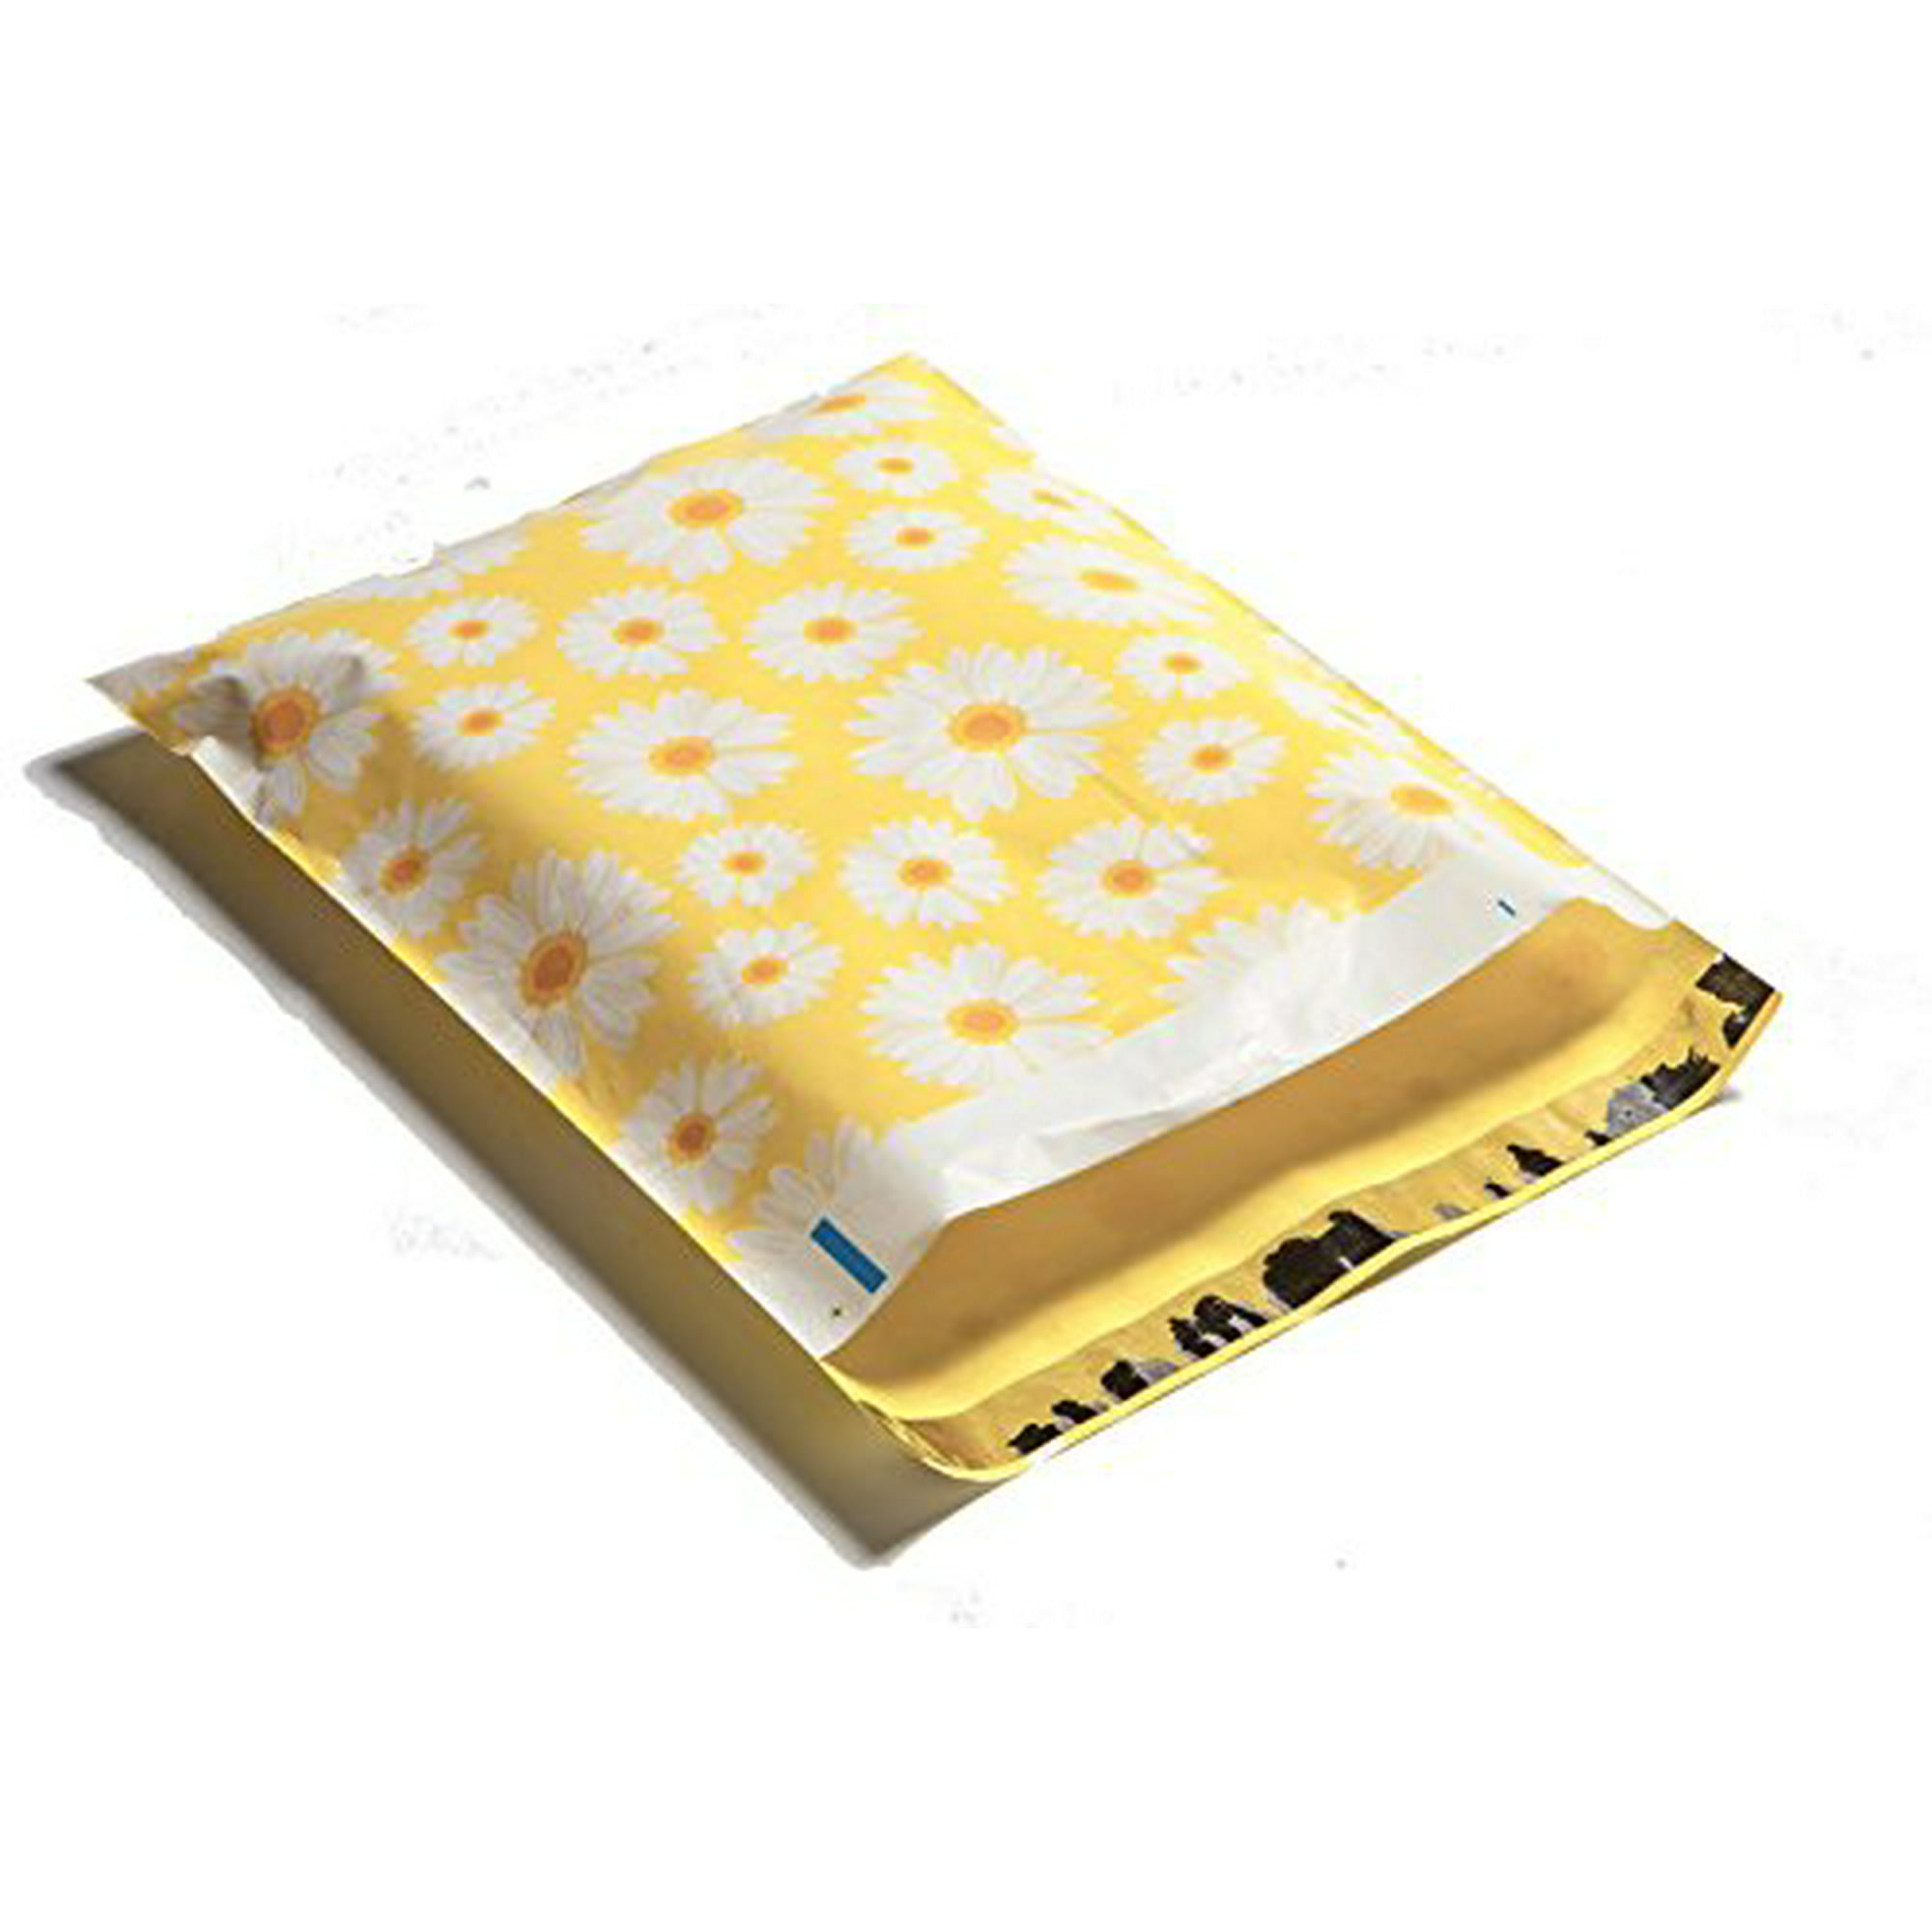 100 Designer Printed Poly Mailers 10X13 Shipping Envelopes Bags YELLOW DAISY